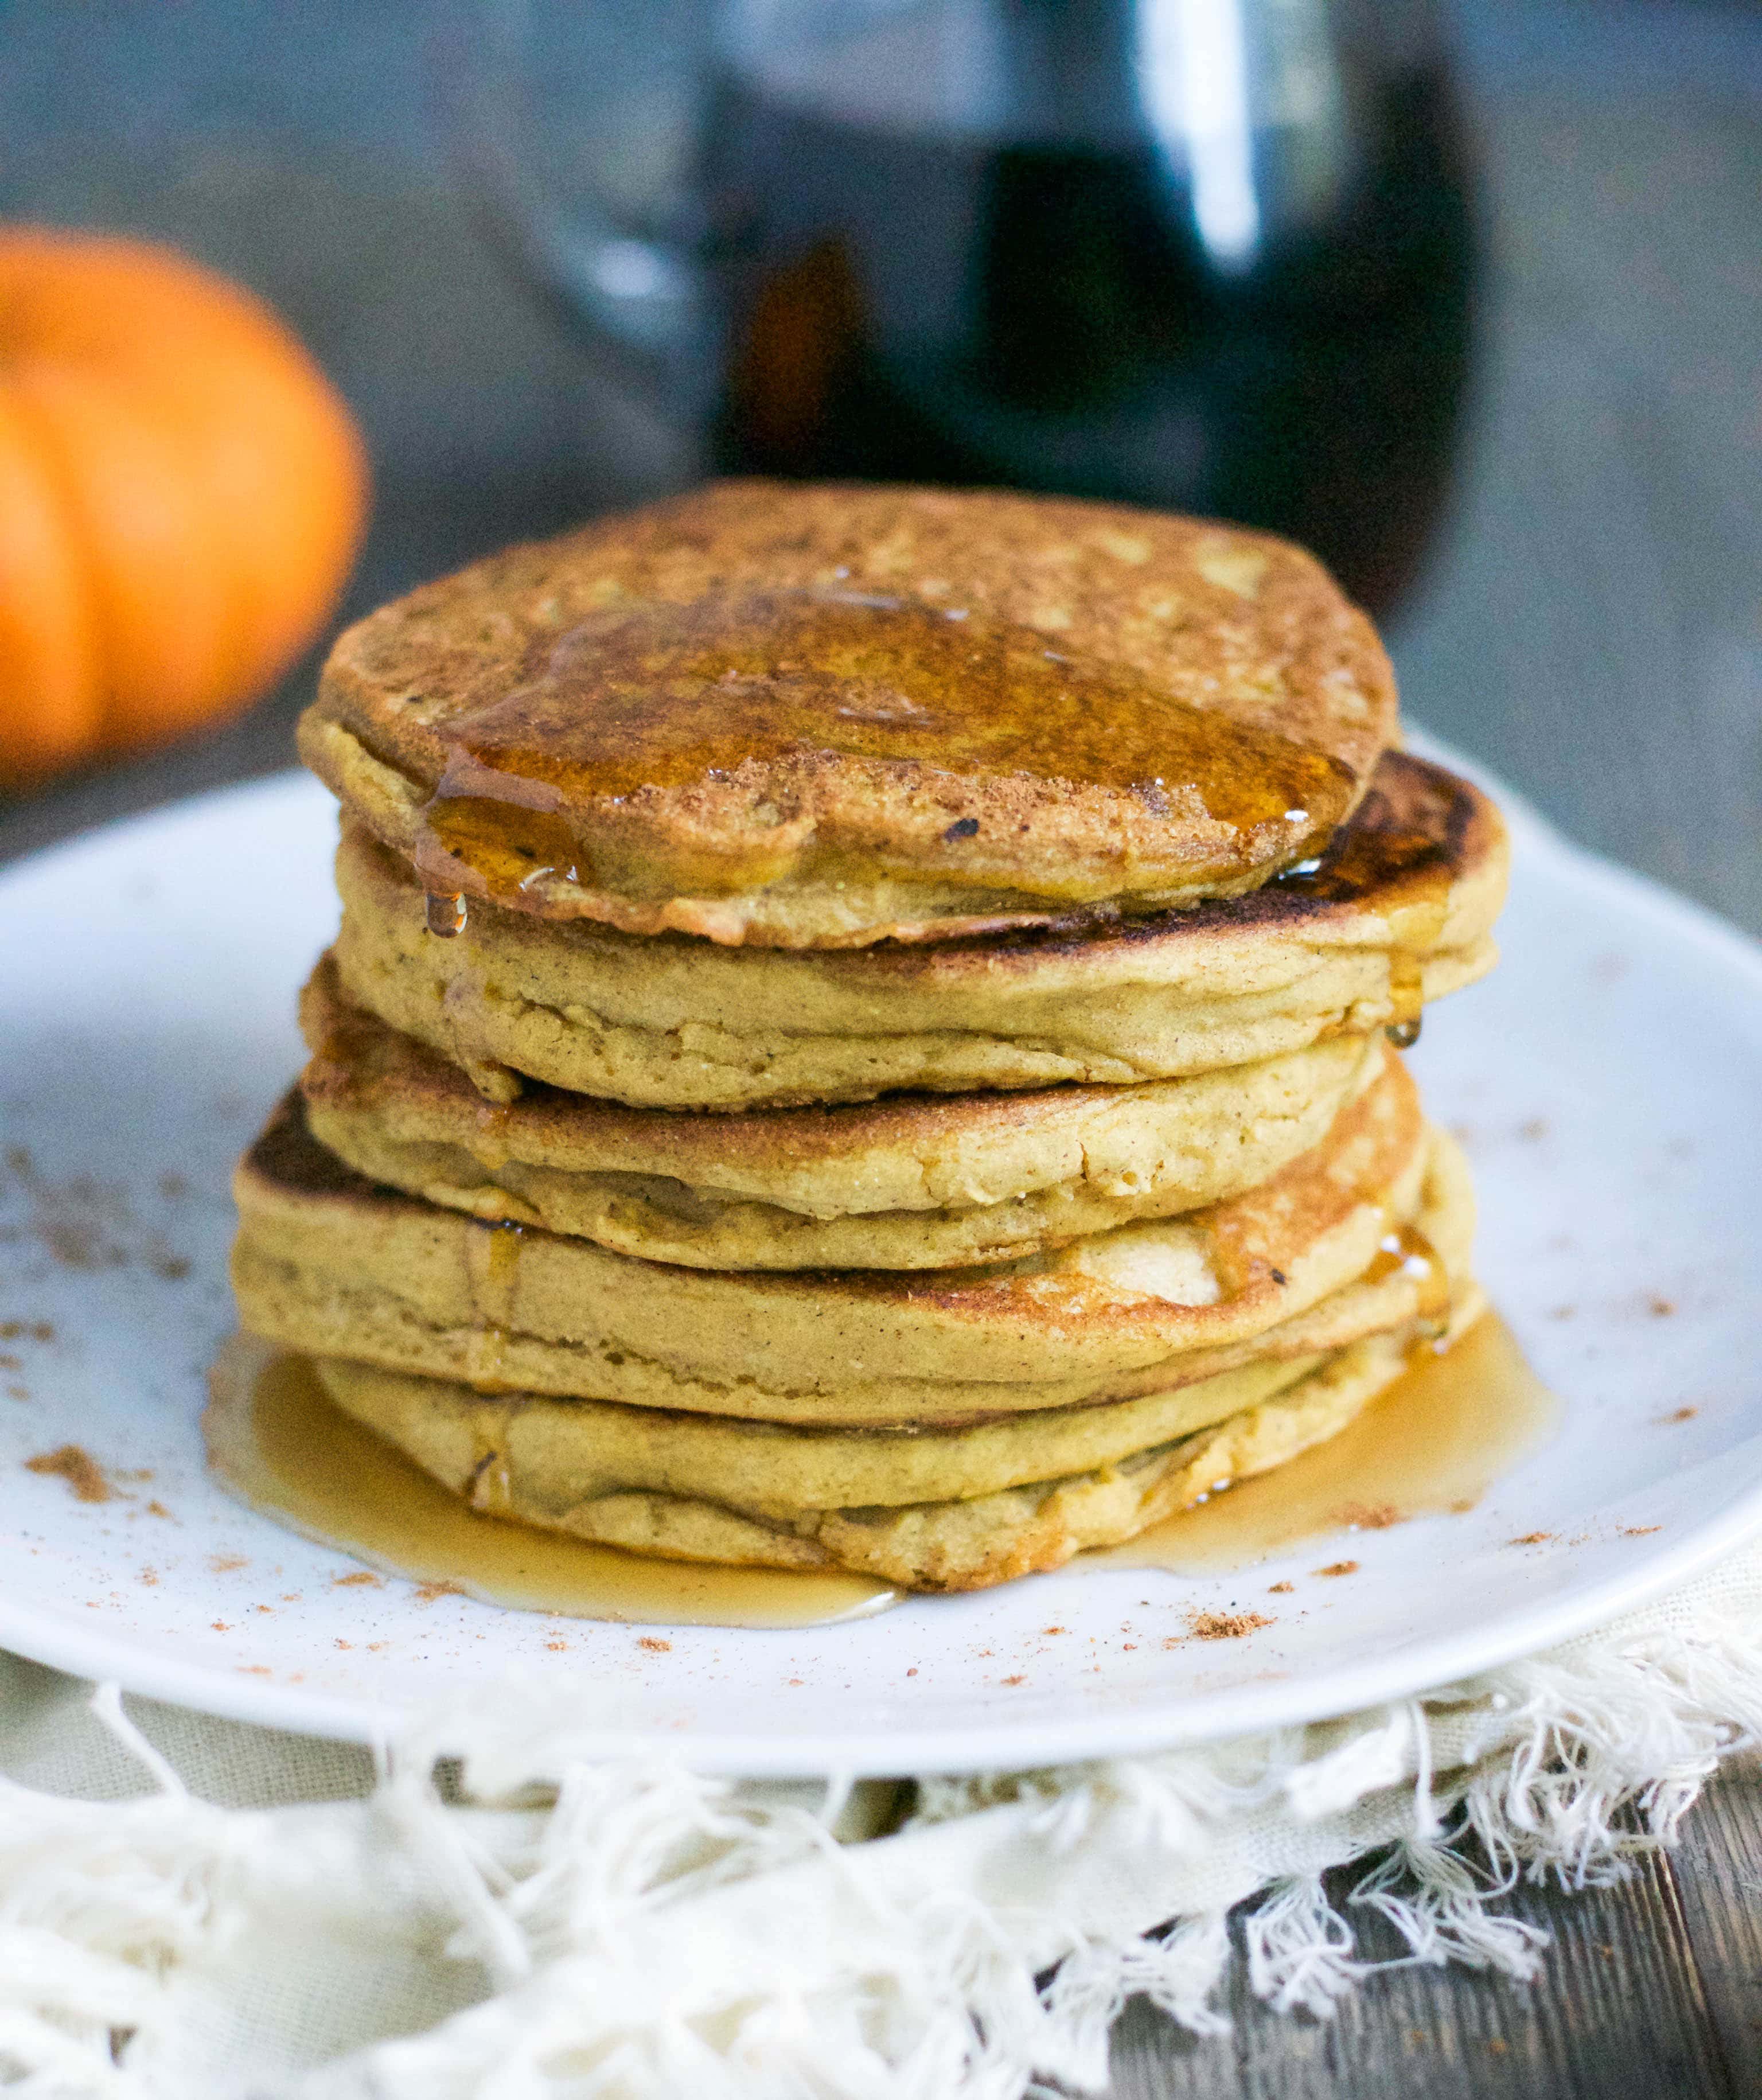 Pumpkin Spice Panckes (Vegan + GF) - you'll love how fluffy these gluten-free and vegan pumpkin spice pancakes are. Perfect for Fall! Just drizzle with some pure maple syrup or maybe some sauteed apples and vegan caramel sauce for an extra little treat! Great for weekend brunch, too! Recipe from A Dash of Megnut - see www.adashofmegnut.com